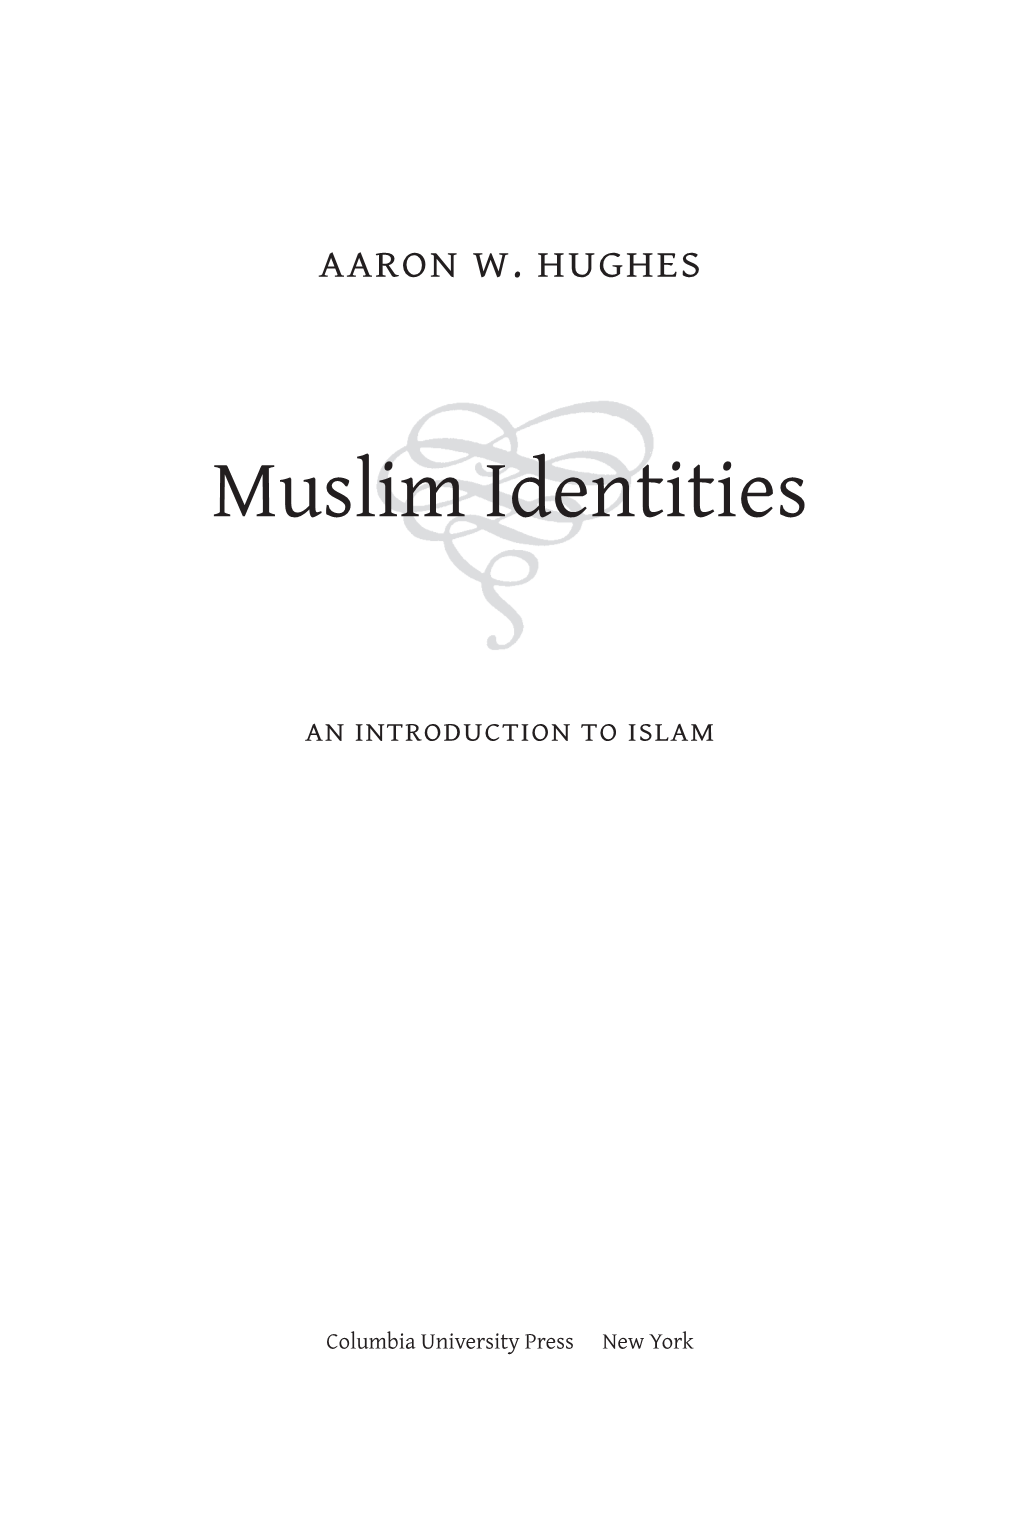 Muslim Identities: an Introduction to Islam